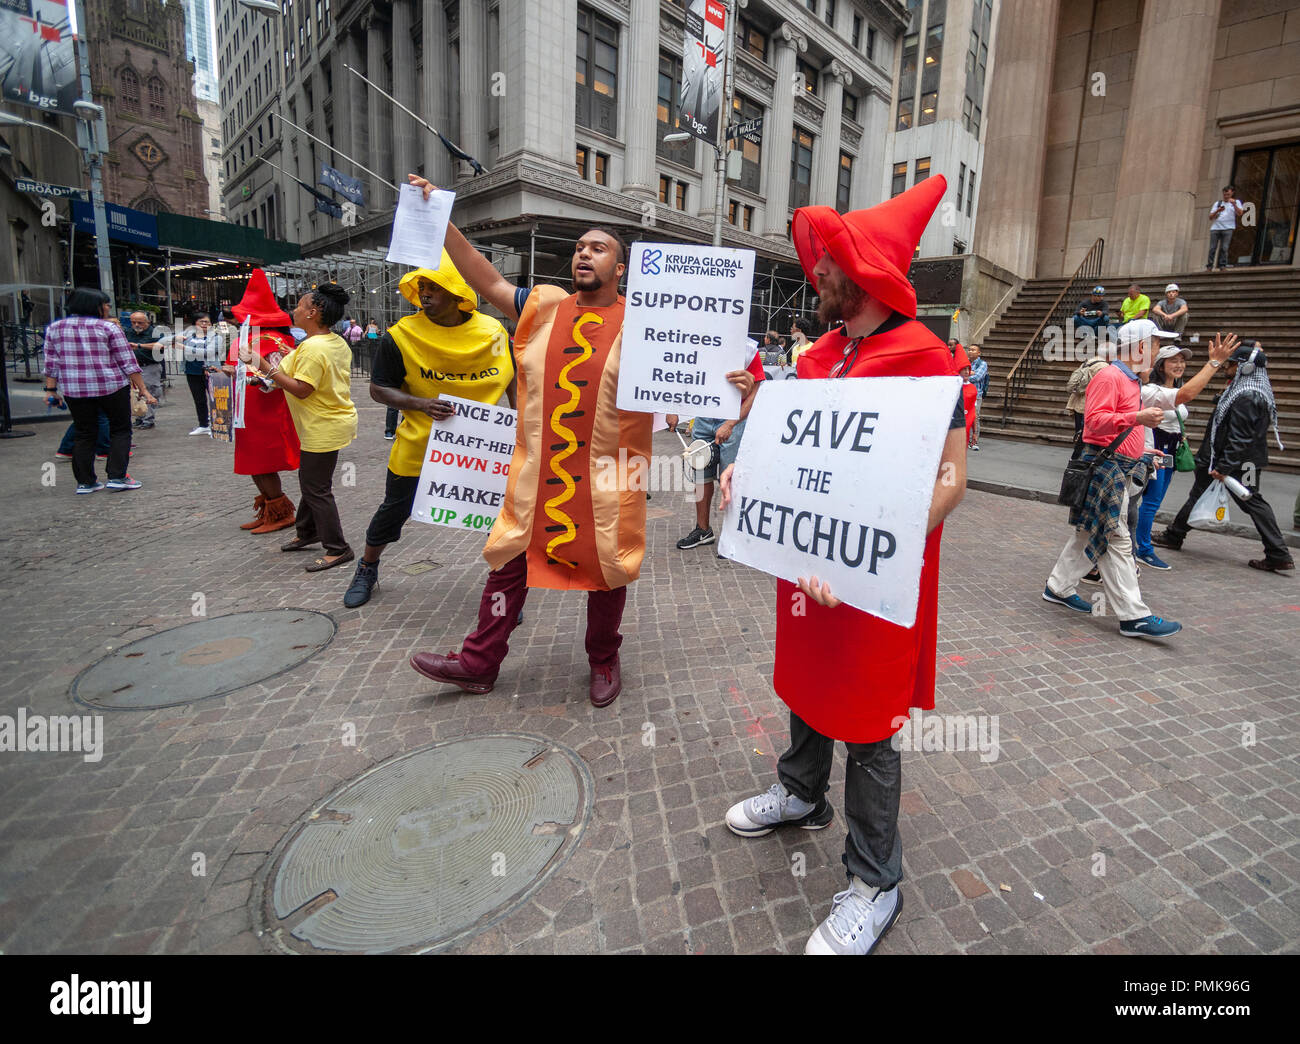 Protesters from Krupa Global Investments dressed as iconic ketchup and mustard bottles protest on Wednesday, September 12, 2018 the management of the Kraft Heinz Company by Berkshire Hathaway and 3G Capital, fearful that the investors are abandoning the company. Krupa wants the company, which has seen its share price drop, to take a number of steps to ensure a fair return to investors even if Kraft Heinz has to be taken private. KGI owns approximately $100 million of Kraft Heinz stock. (Â© Richard B. Levine) Stock Photo